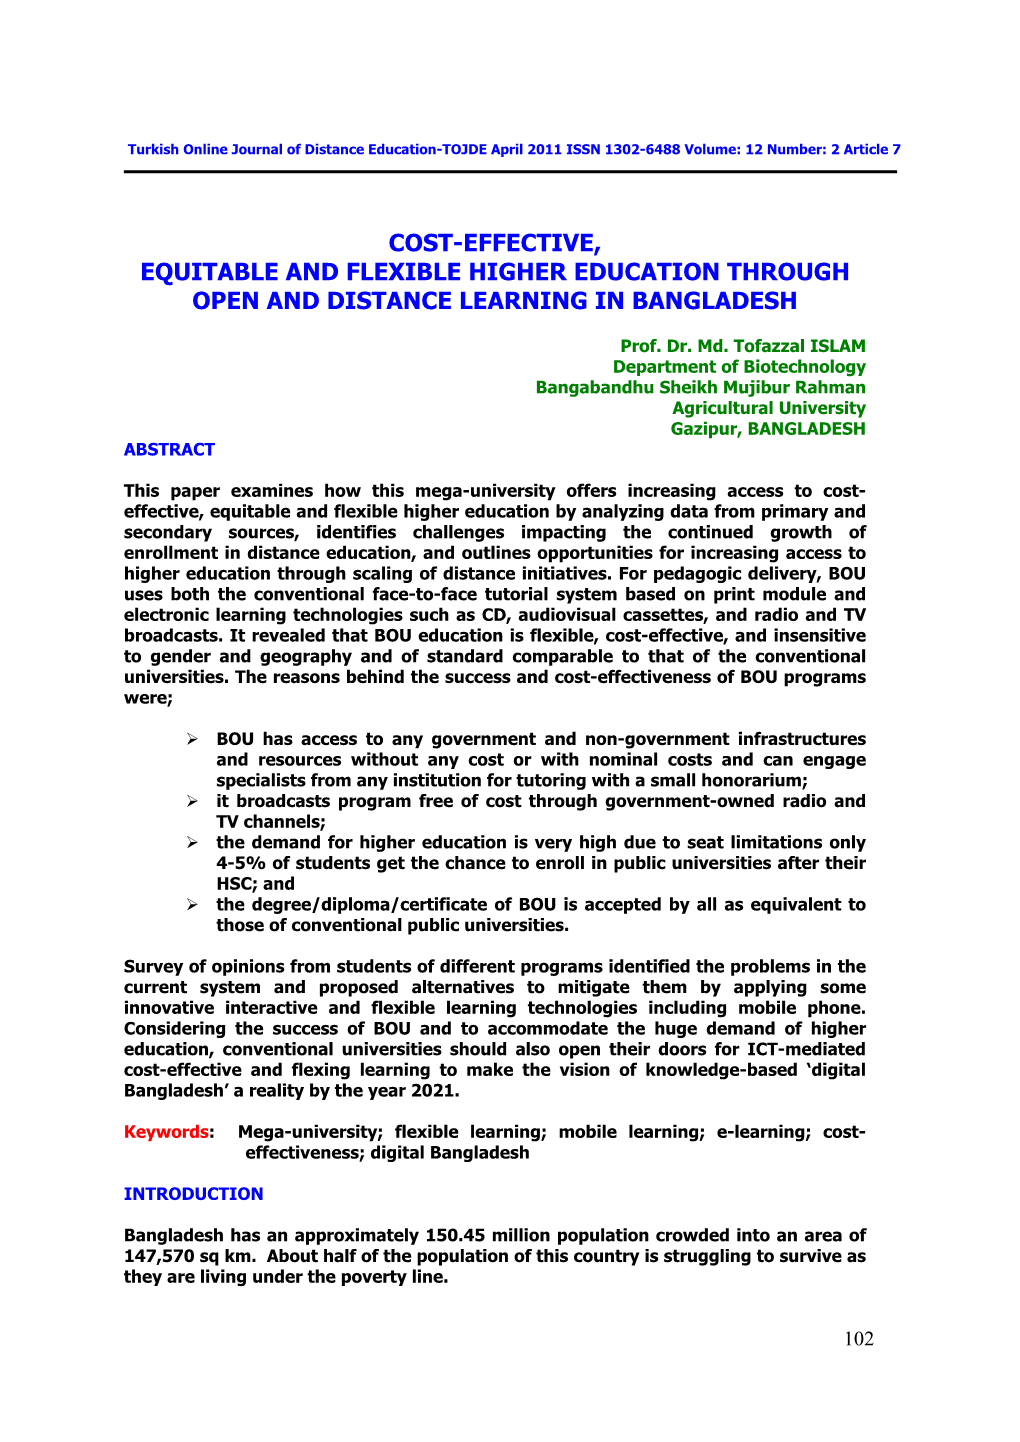 Cost-Effective, Equitable and Flexible Higher Education Through Open and Distance Learning in Bangladesh